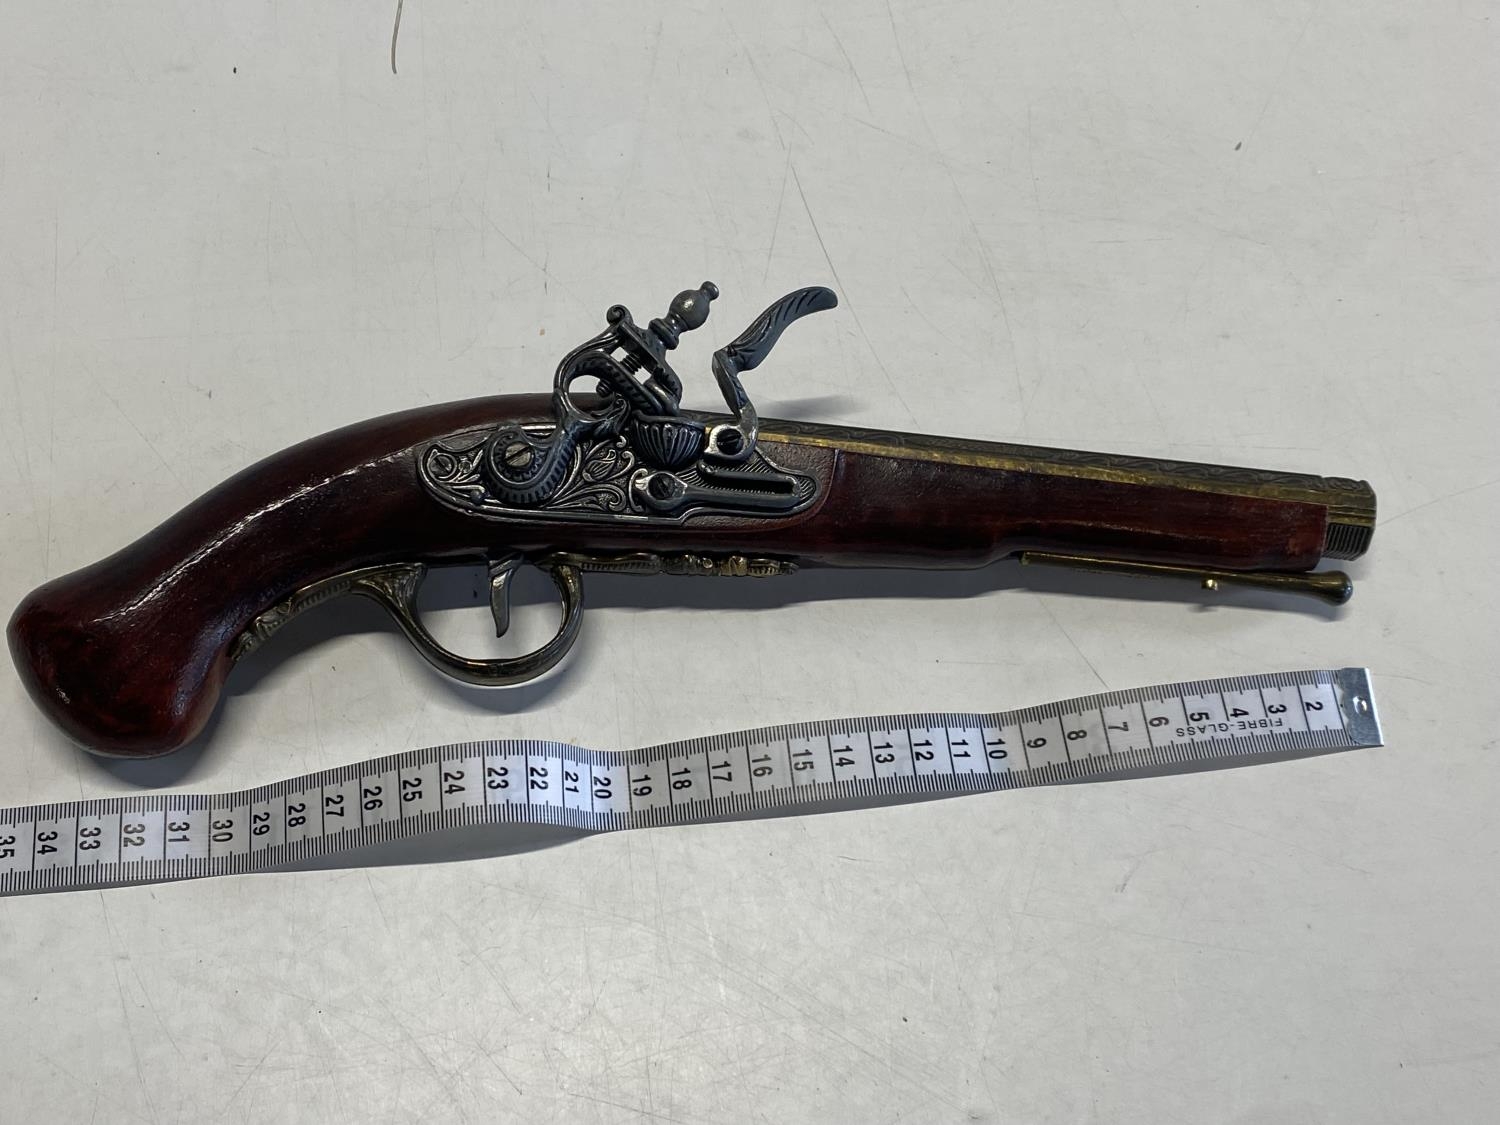 A good quality reproduction wall hanging flintlock pistol, over 18's only, UK post only